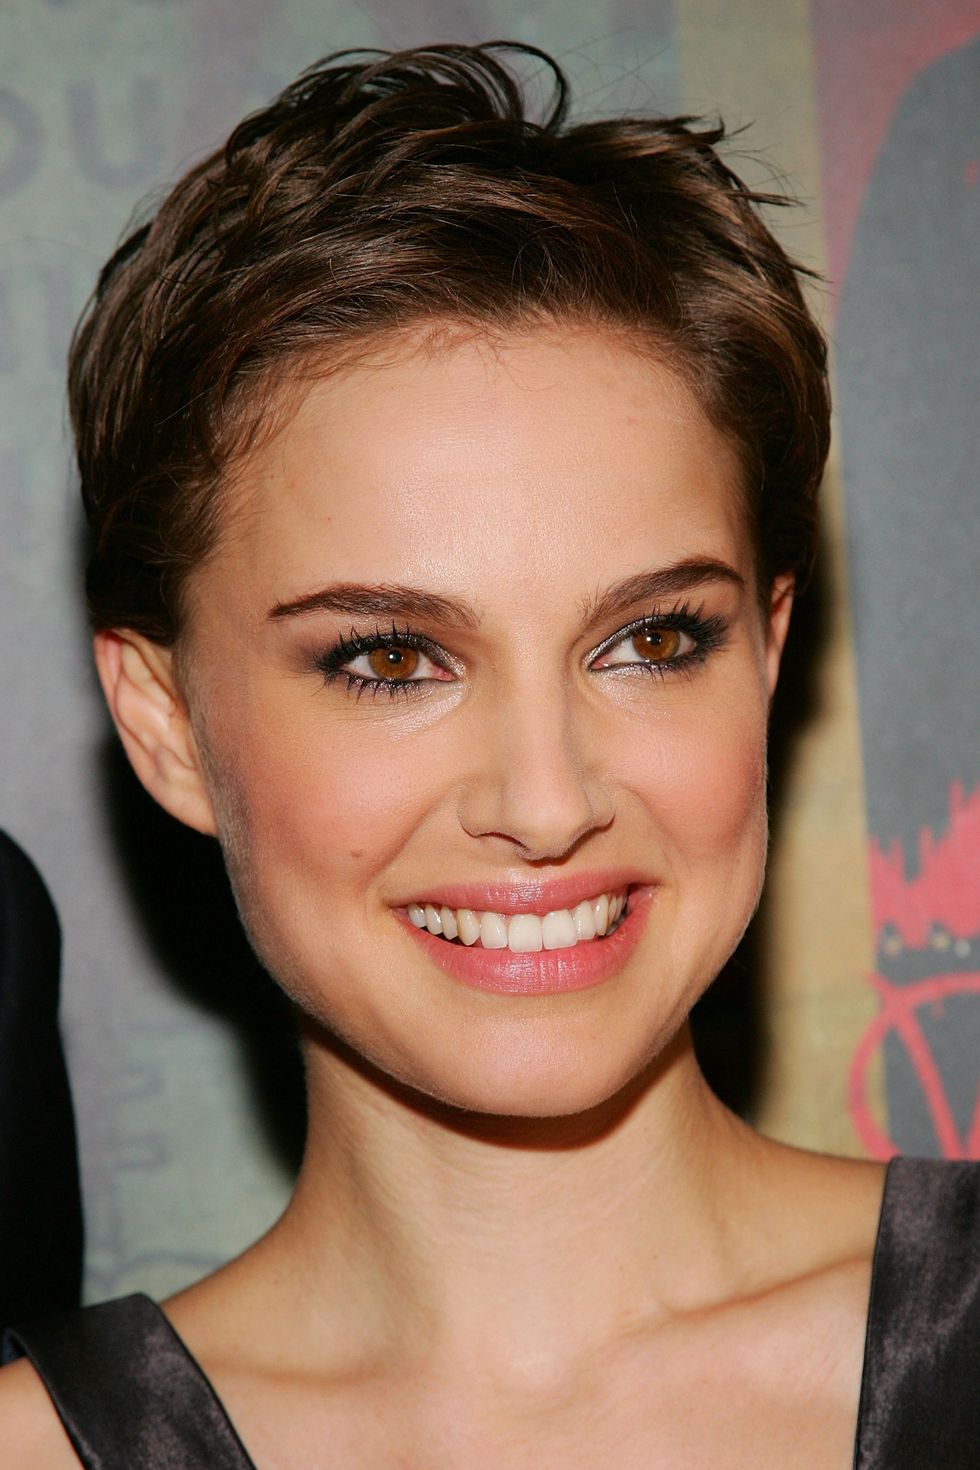 15 Best Styles For Thinning Hair - Haircuts To Make Thin Hair Look